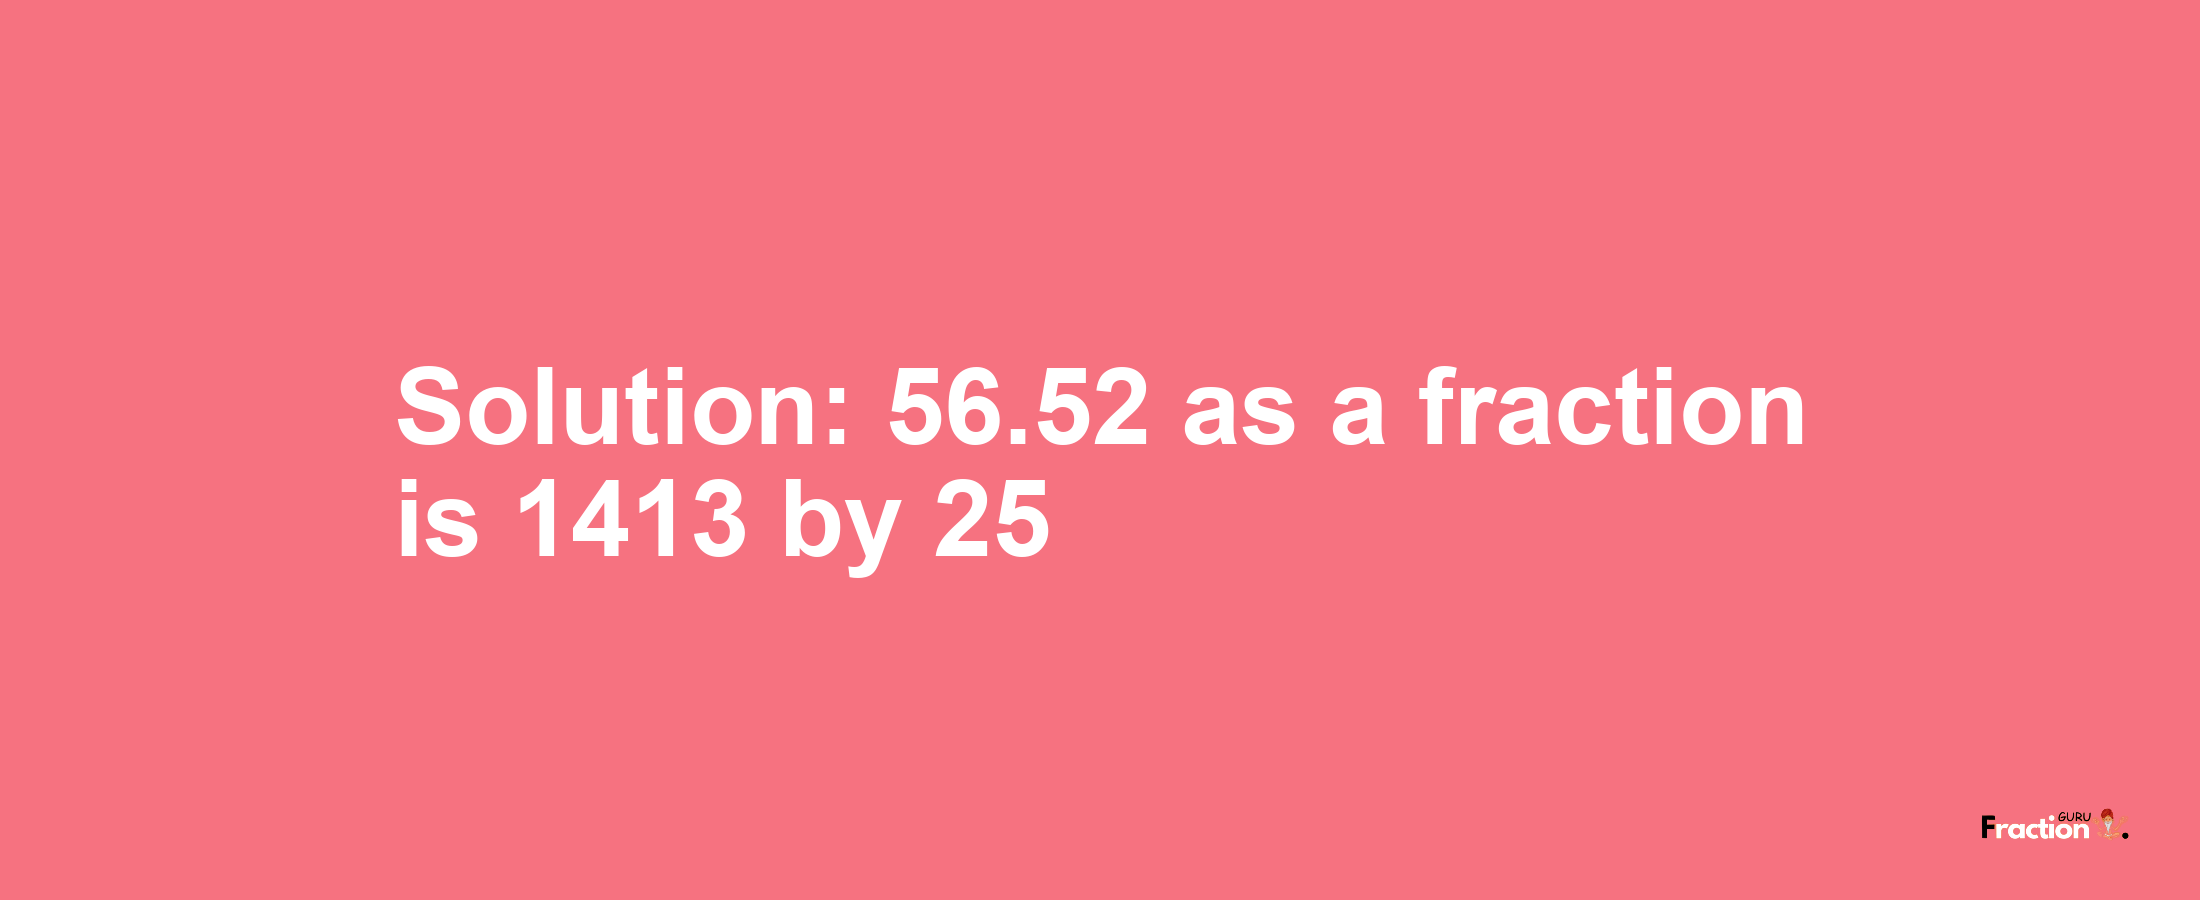 Solution:56.52 as a fraction is 1413/25